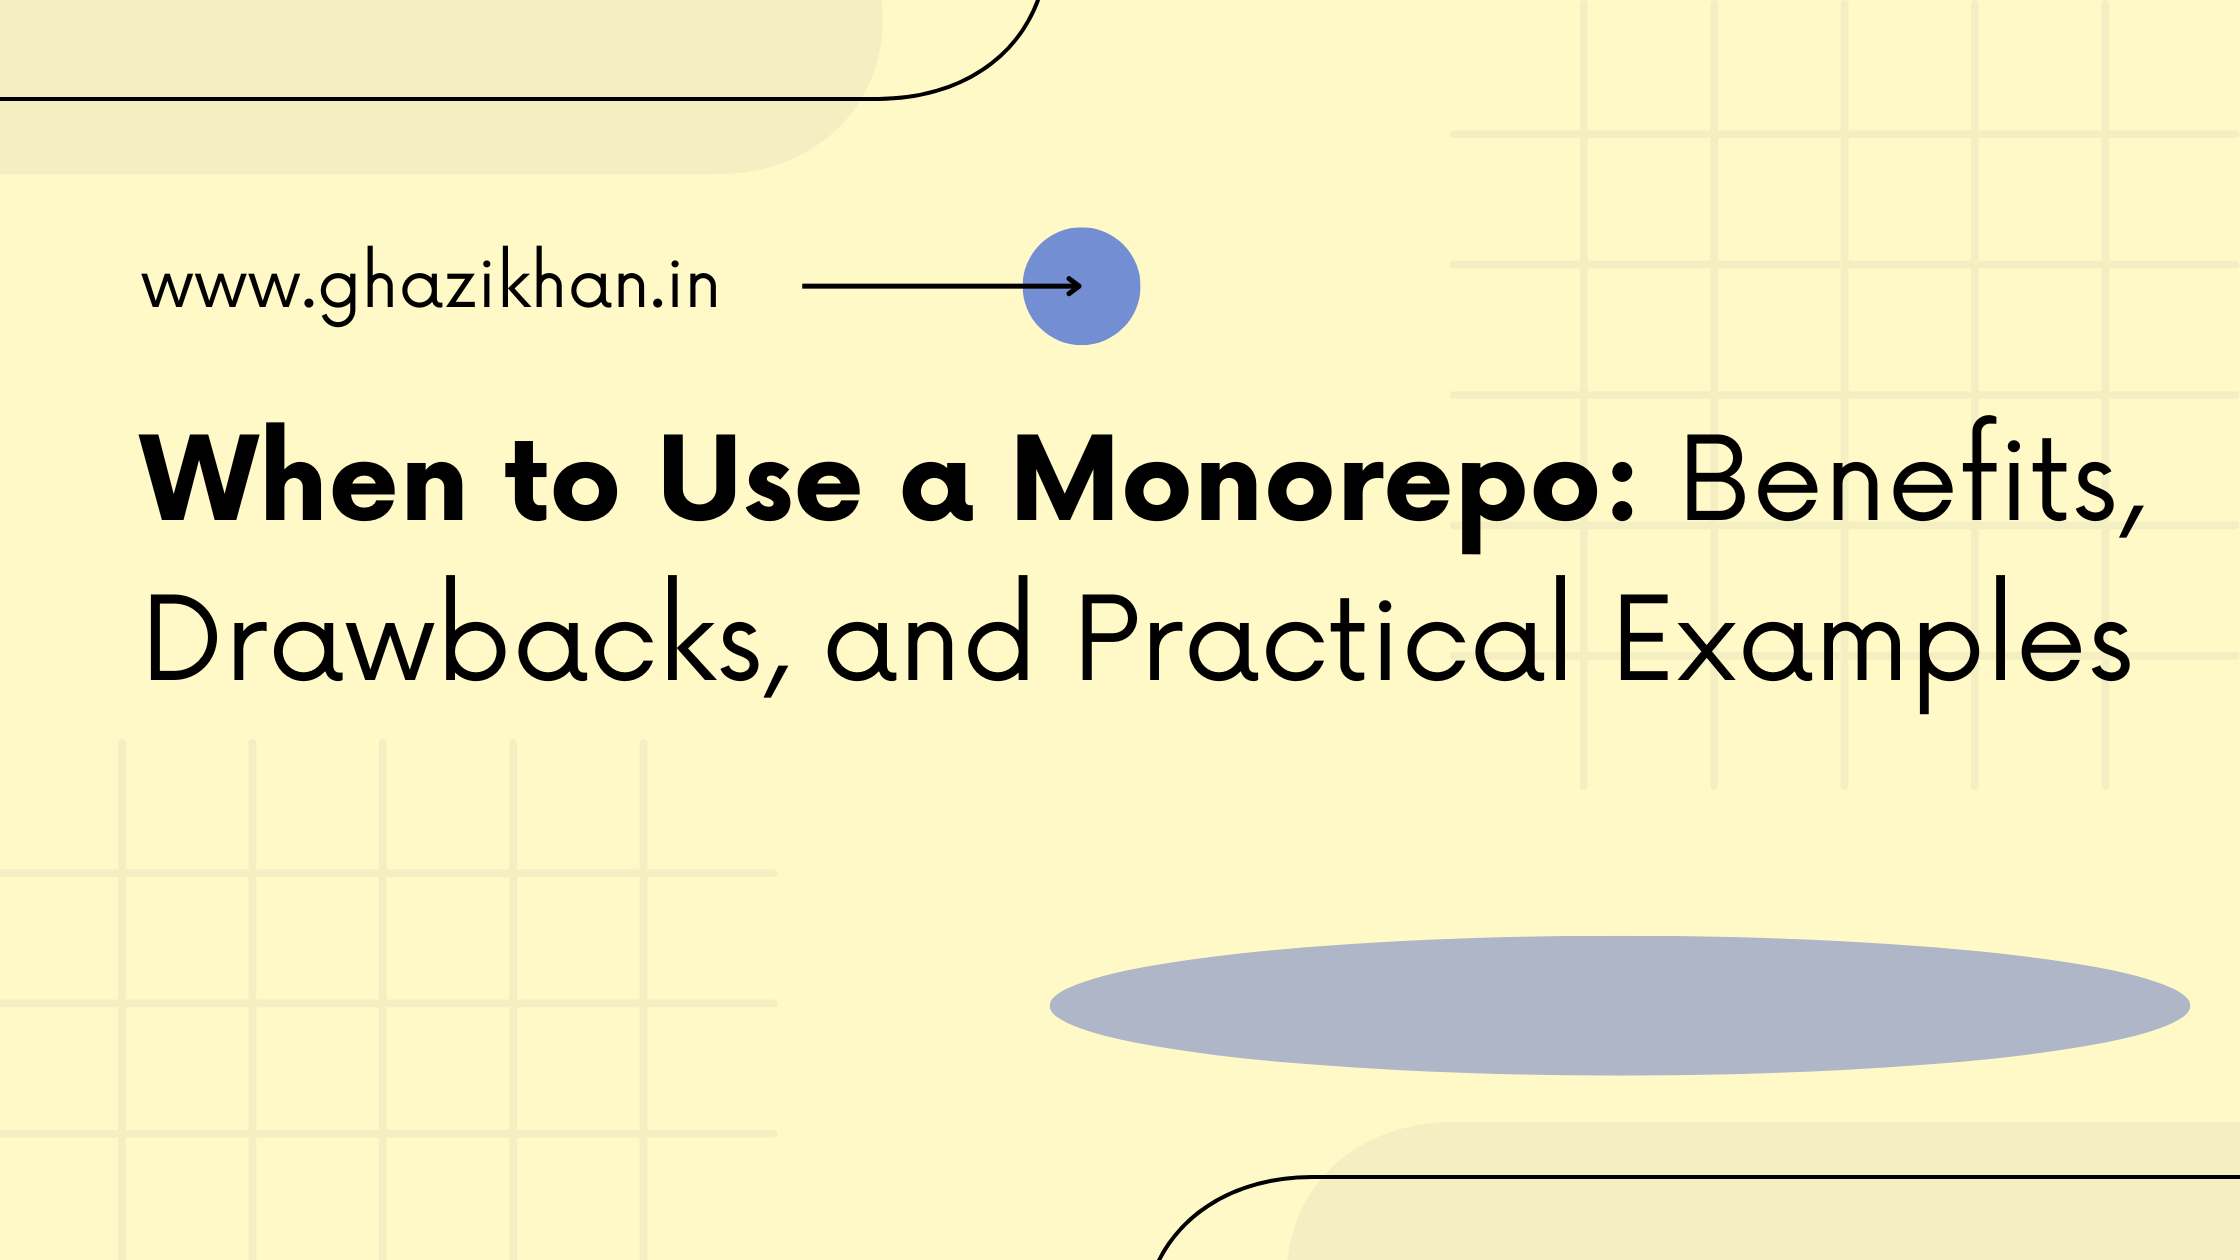 When to Use a Monorepo: Benefits, Drawbacks, and Practical Examples